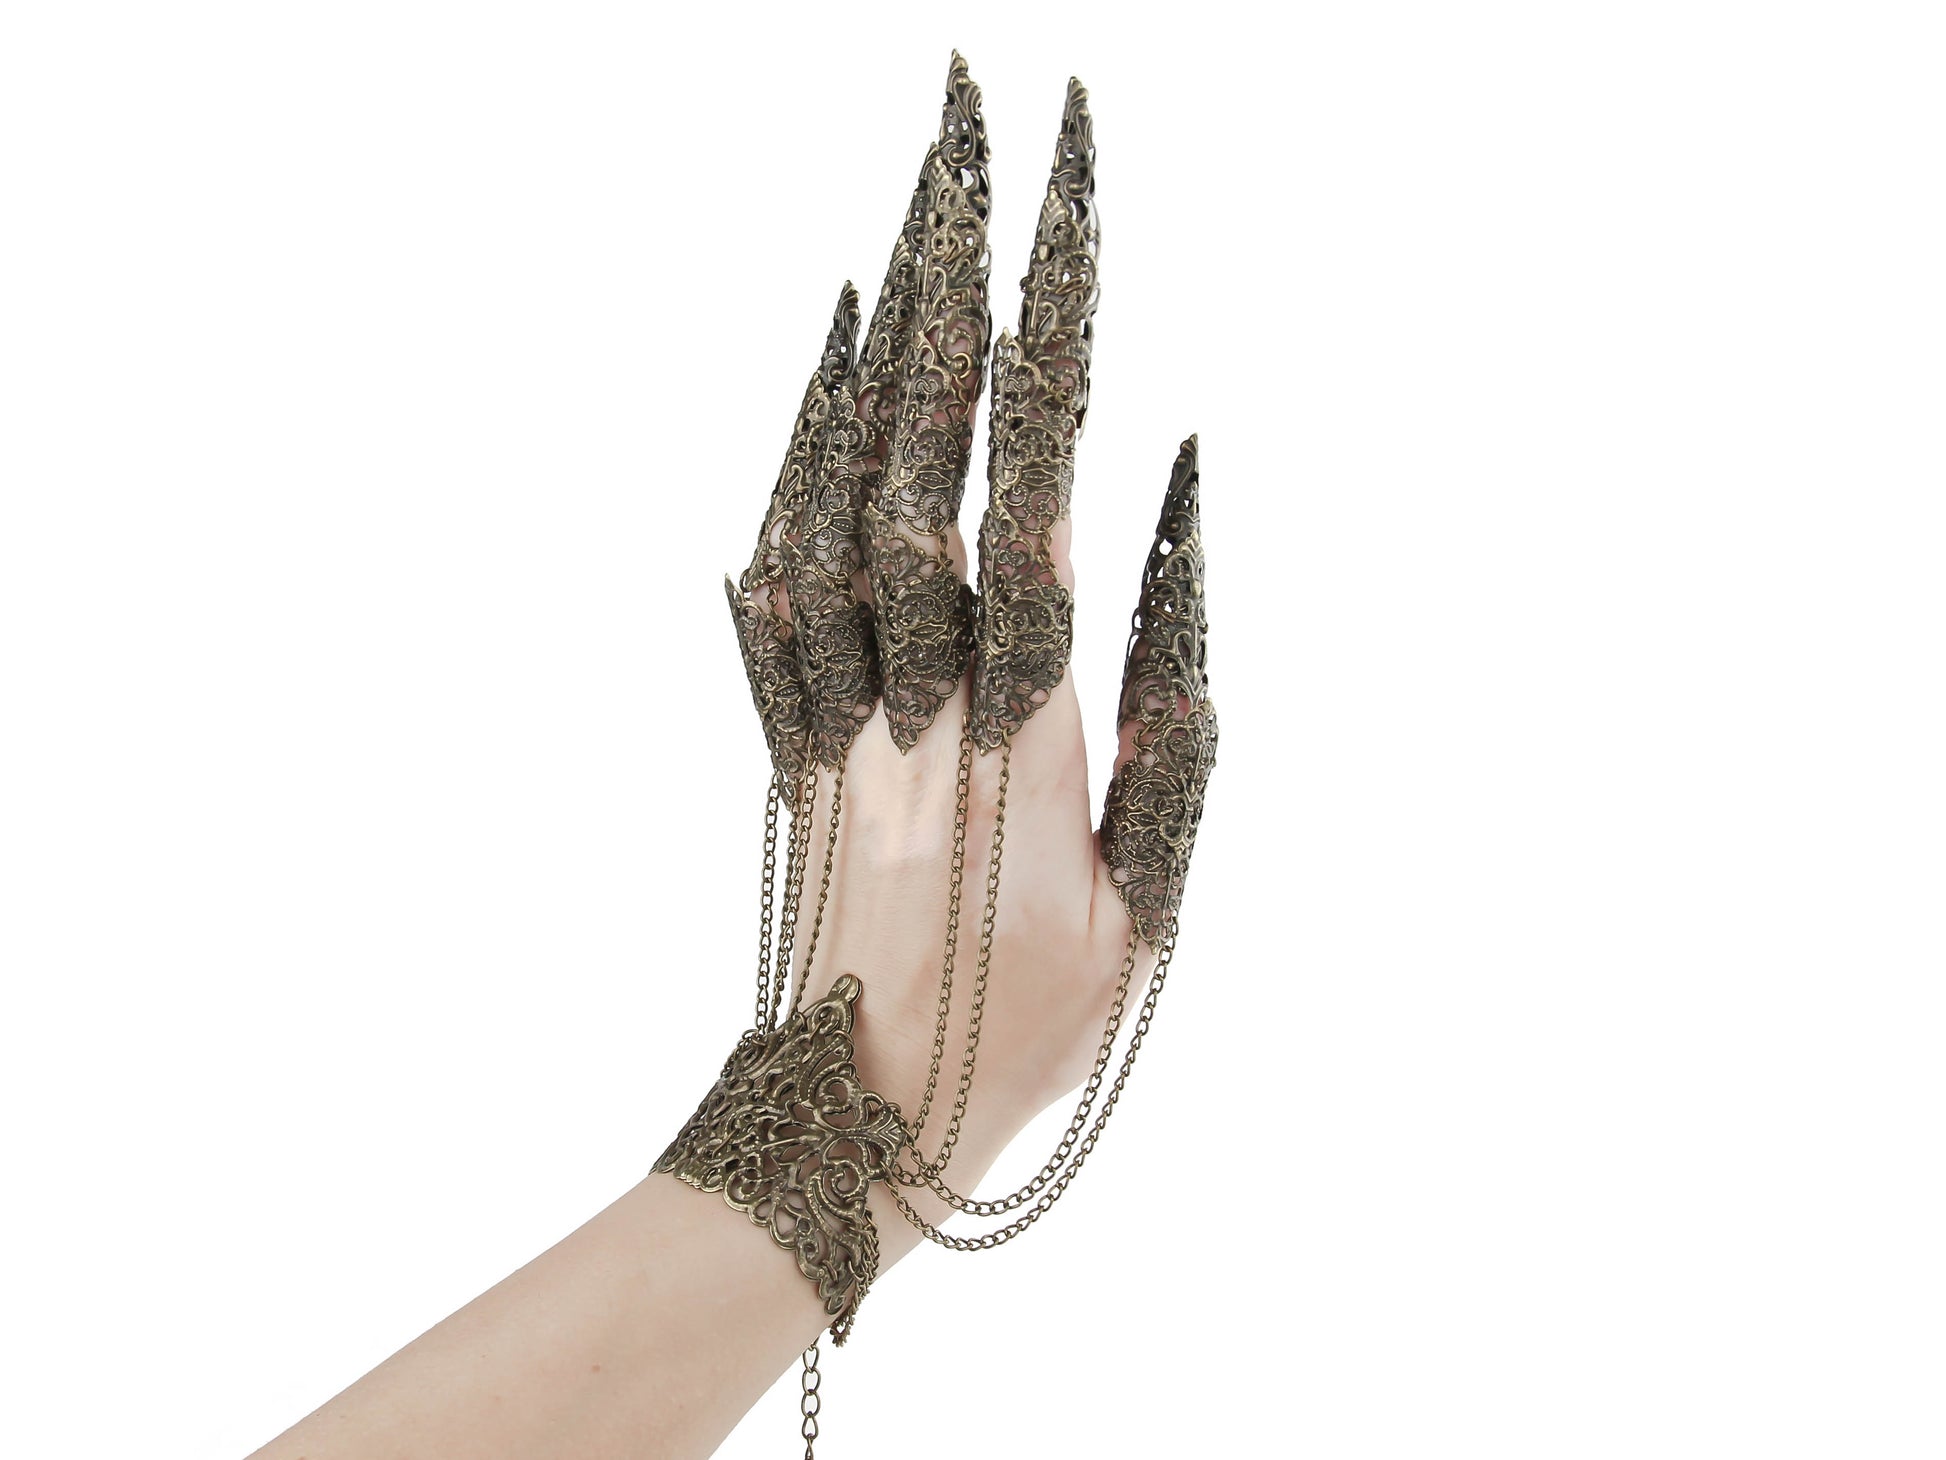 A hand dons a Myril Jewels bronze metal glove with long full finger claw rings, creating a stunning neo-gothic statement. This bold accessory, designed for the dark avant-garde enthusiast, is ideal for adding a whimsical yet edgy touch to gothic-chic, witchcore, or minimal goth attire.